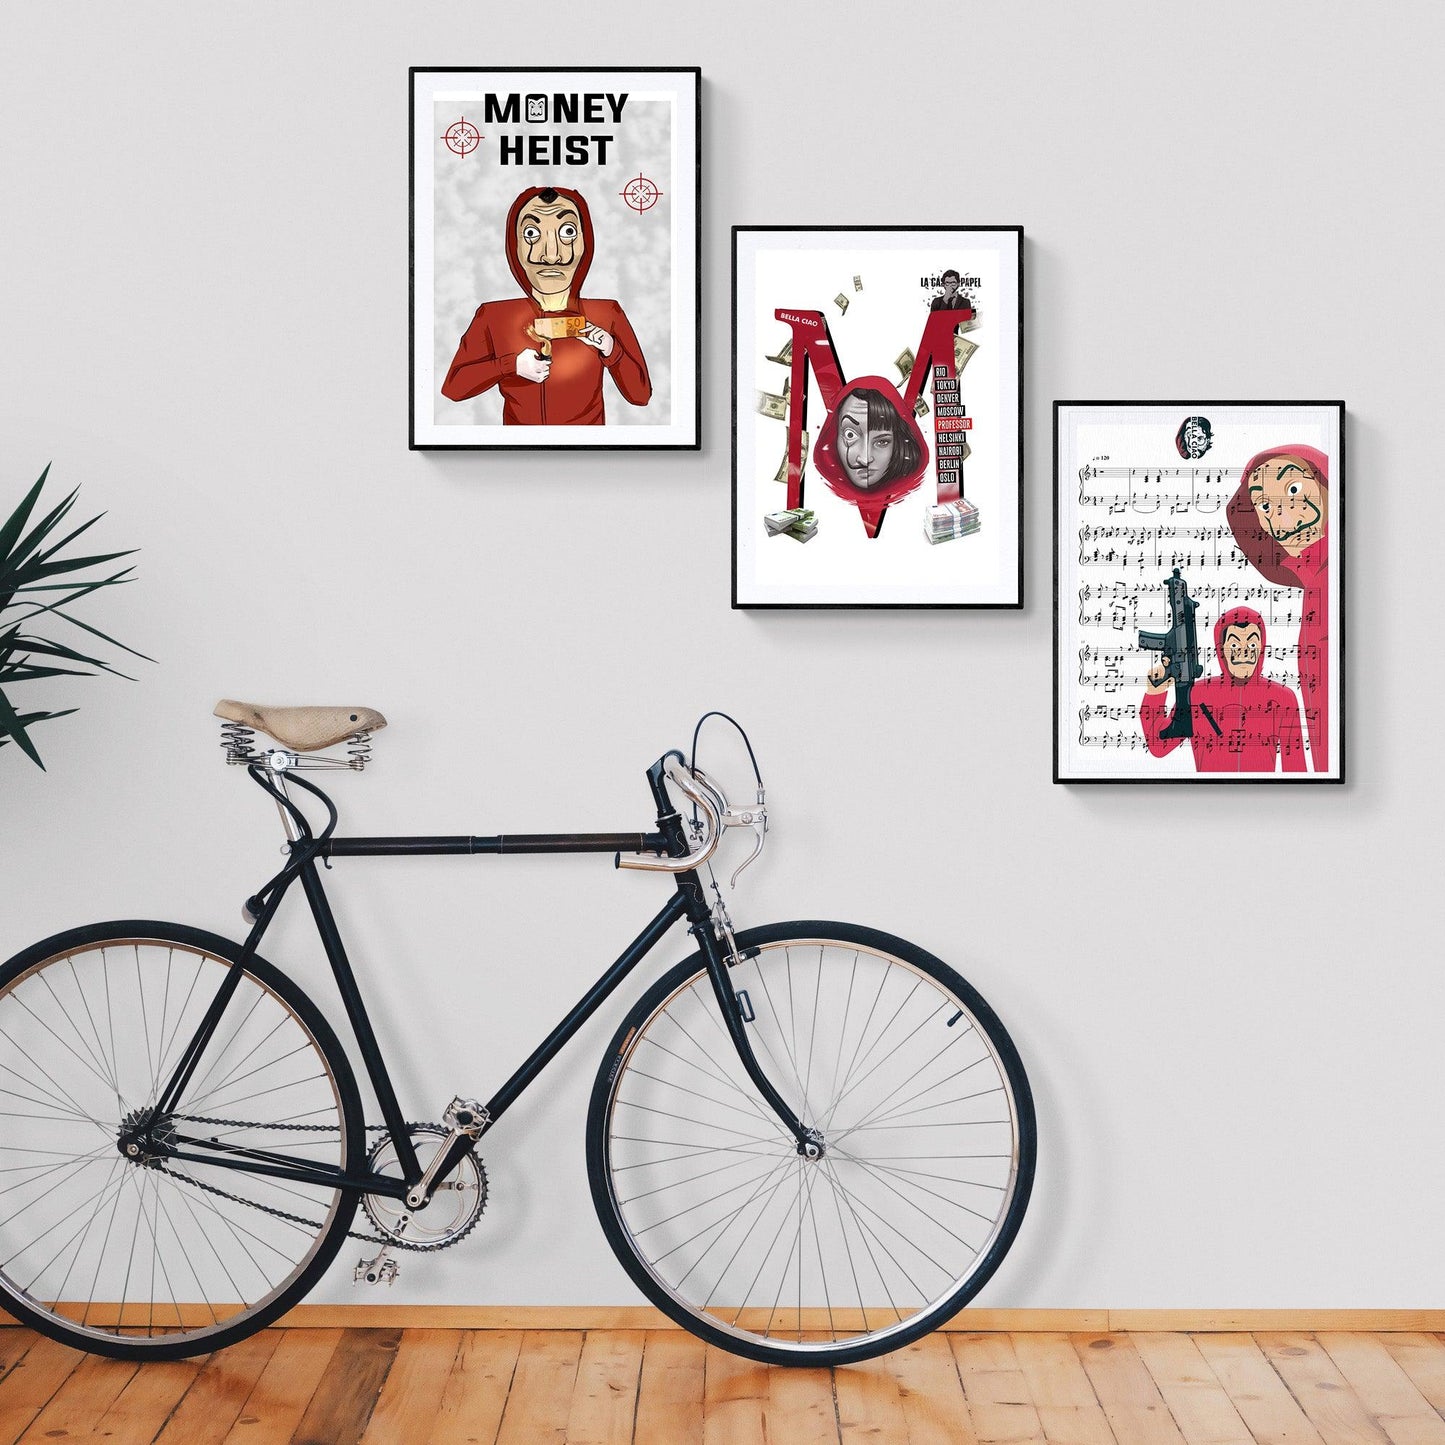 Celebrate the great movie Money Heist with this Bella ciao Print. Featuring the iconic song's sheet music and lyrics, this print is perfect for lovers of the show and music. Adorn your walls with its unique style and bring some life to any room in your home. With its timeless design, you'll be able to transport into the thrilling world of Money Heist anytime you want. This Bella ciao Print has it all—stylish design, beautiful music, and an unforgettable story. Bring it home today!